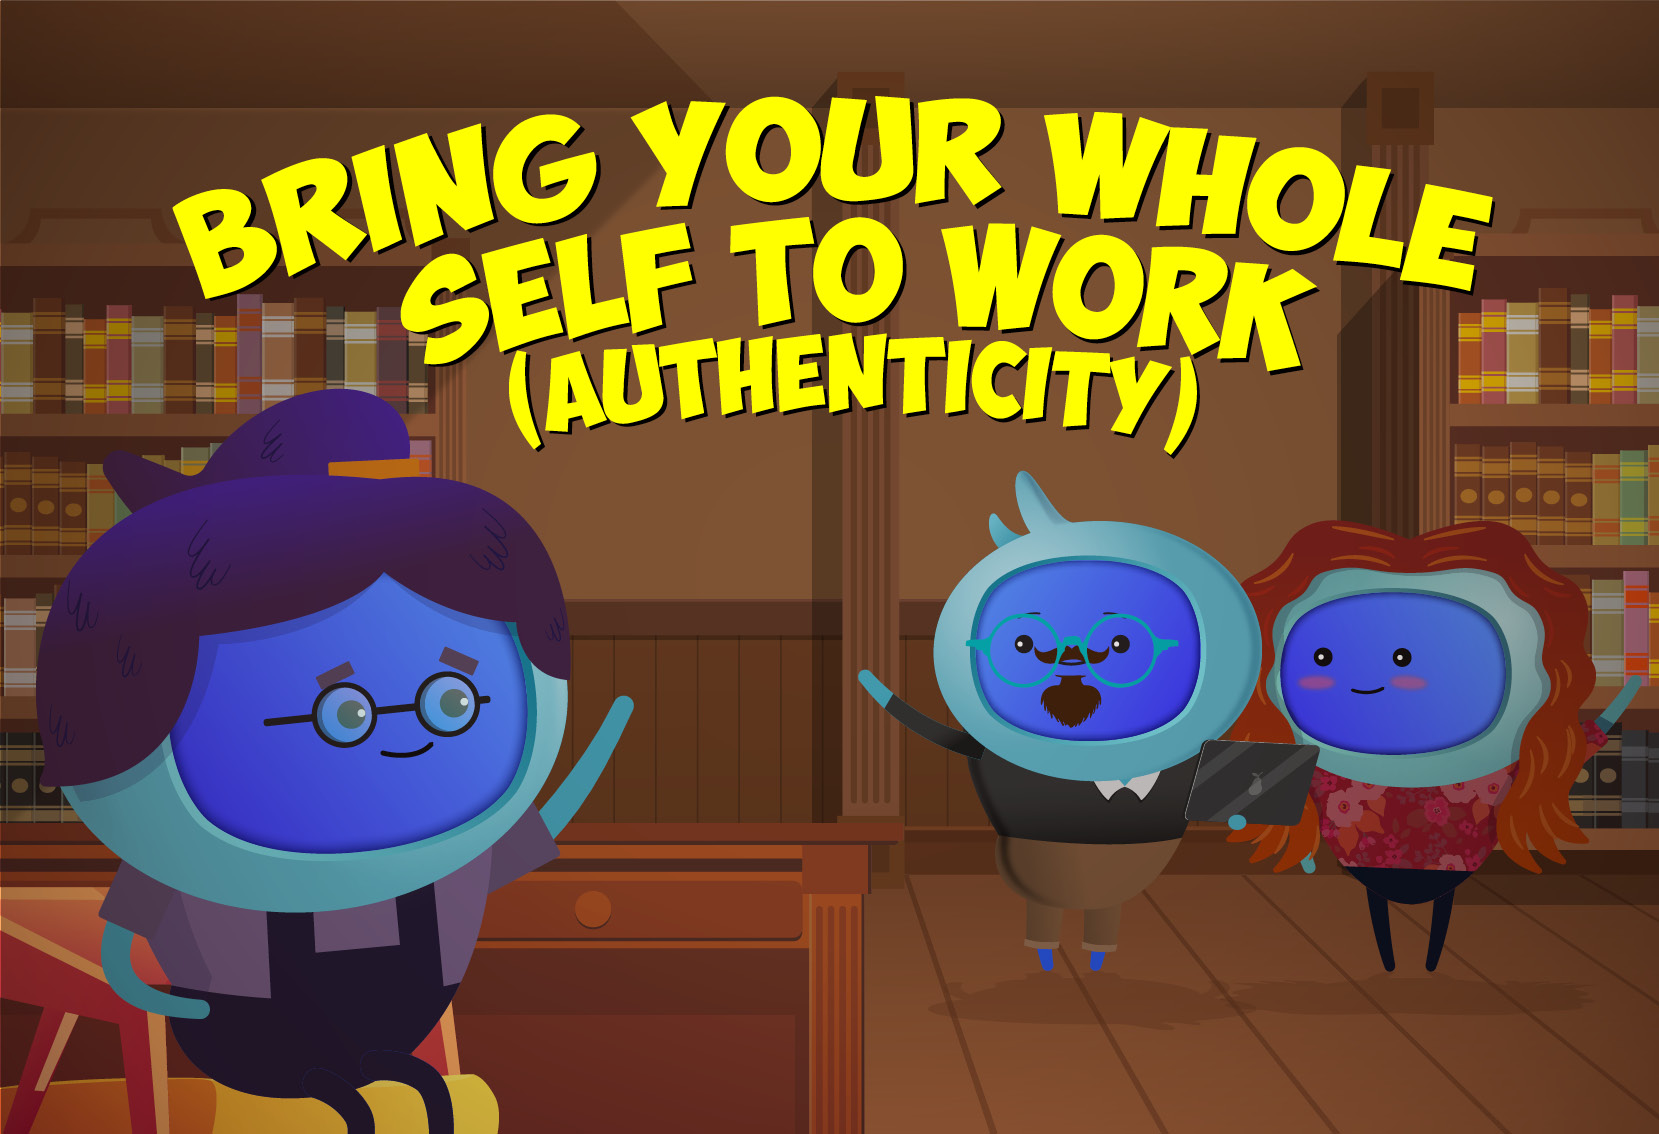 iAM 00231 - Bring Your Whole Self to Work (Authenticity) - LMS Thumbnail-1